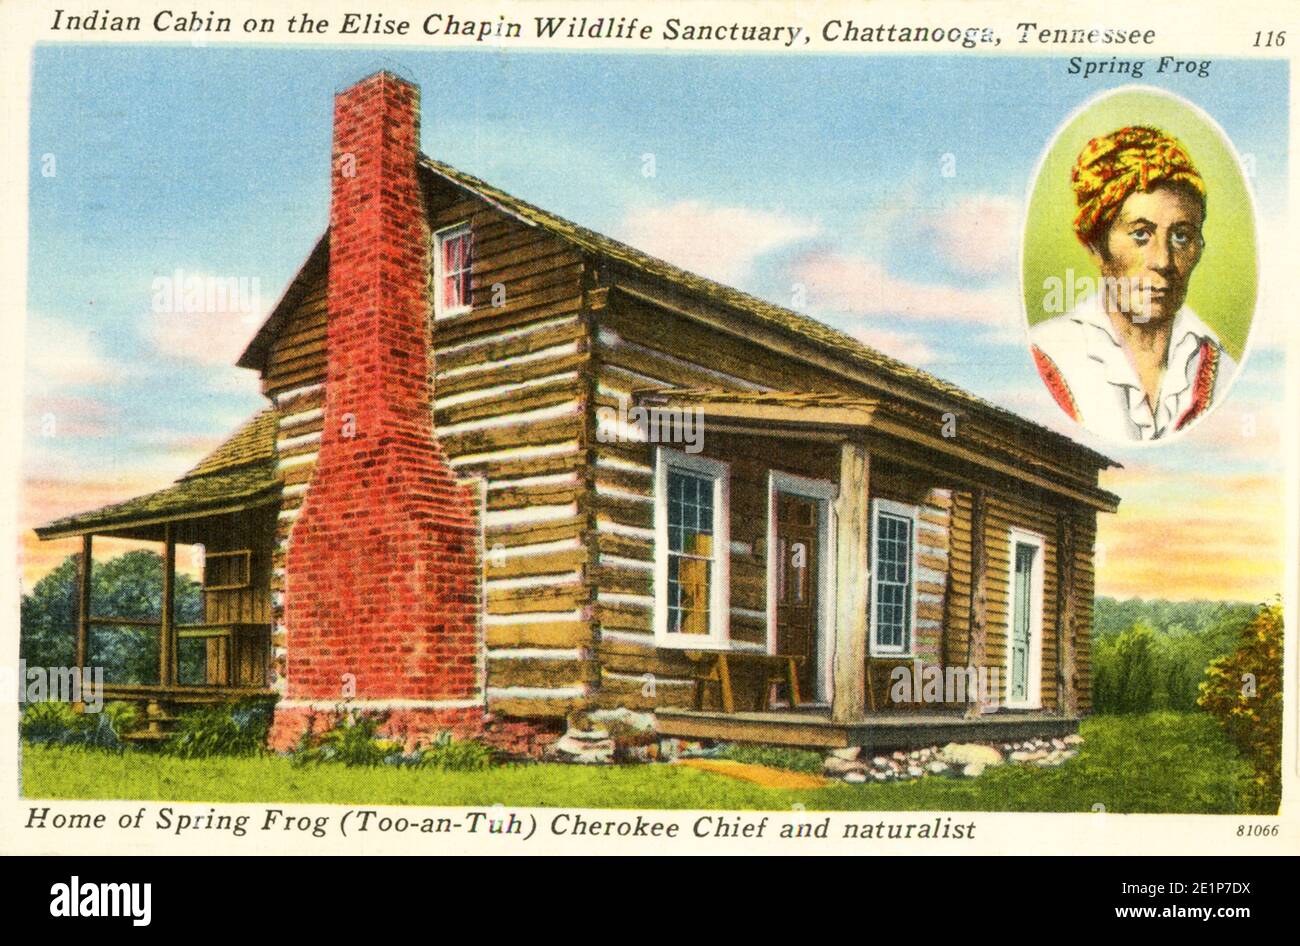 Indian Cabin on the Elise Chapin Wildlife Sanctuary, Chattanooga, Tennessee - Home of Spring Frog (Too-an-Tuh) Cherokee Chief and Naturalist. The cabin was built by Indians about the year 1748. It was the old home of Spring Frog, Cherokee naturalist and sportsman. He was born in 1754. It is claimed to be the only cabin left in Tennessee built by Indians and stands on the Elise Chapin Wildlife Sanctuary, operated by the Chattanooga Audubon Society. It may be reached by Atlanta Highway U.S.41, or the east Brainerd Road Stock Photo